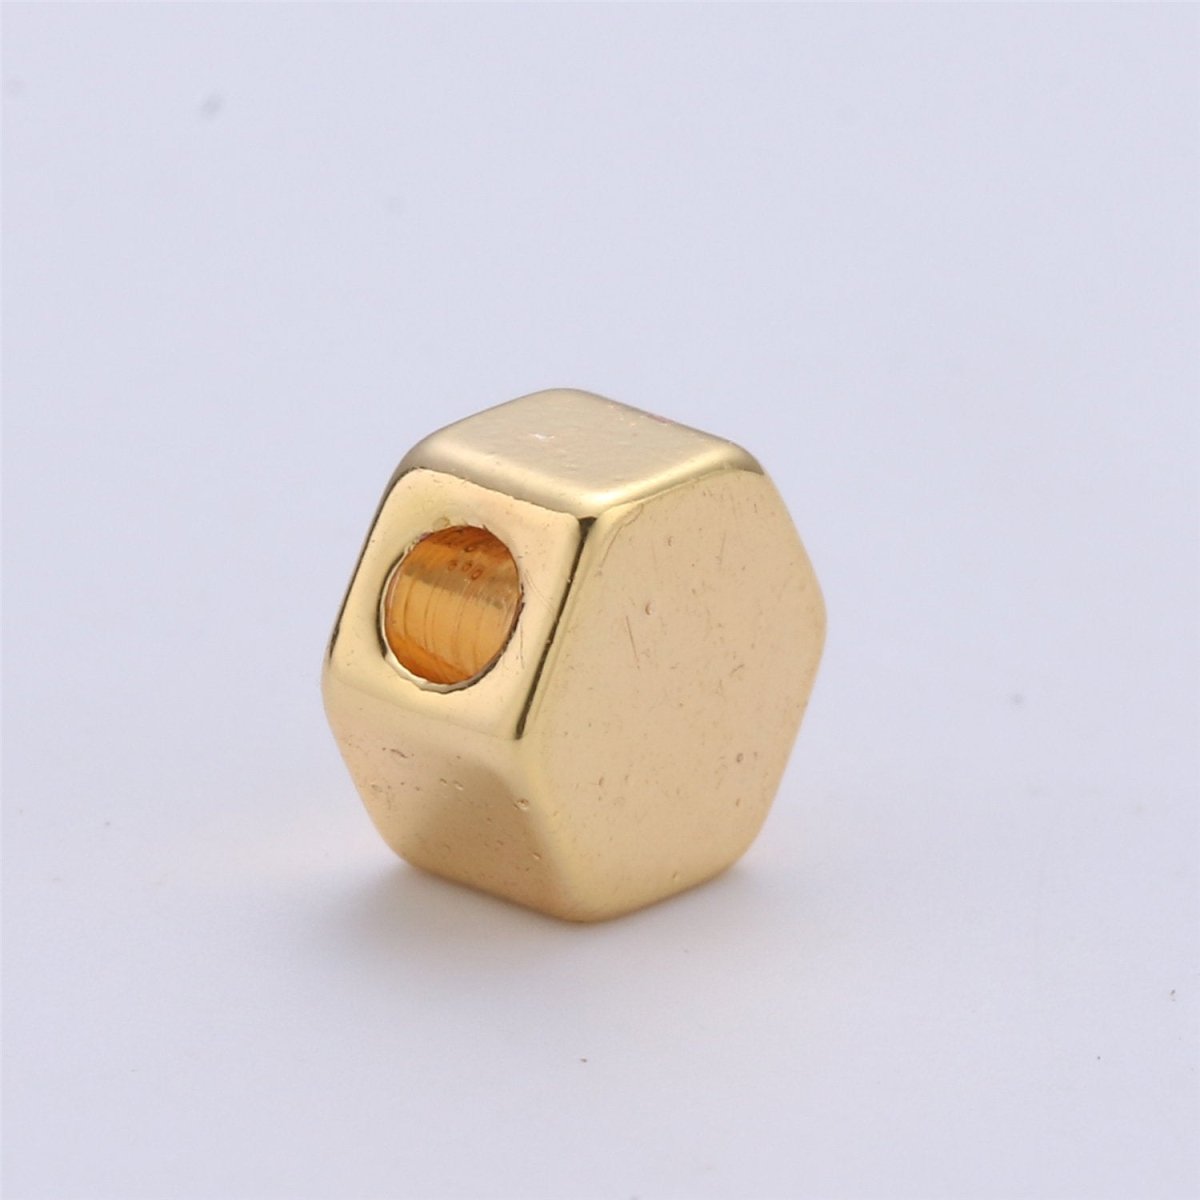 5mm Hexagon Bead 14K Gold Filled Charm Bead Spacer for Bracelet Necklace Spacer Jewelry Supply Finding Small hole bead B-224 - DLUXCA